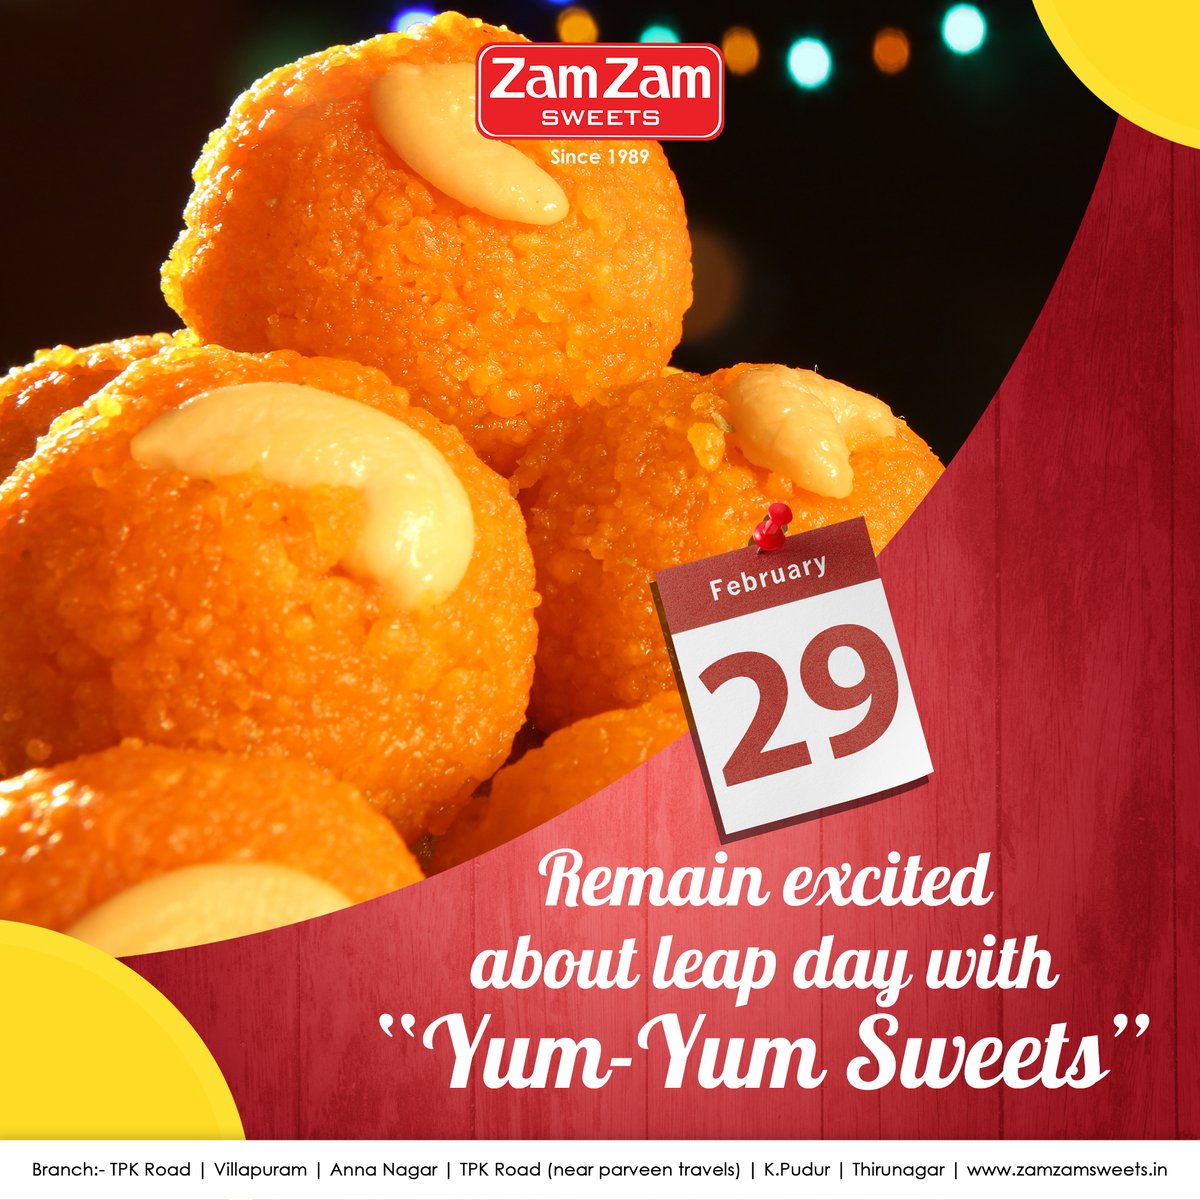 Make this special day more special with zam zam offers. Hearty leap day wishes to everyone.

Happy leap day

#leapday #leapyearday2020 #feb #sweetsnesday #Offersforyou #Sweettime #MaduraiSpecial #zamzamsweets #madurai